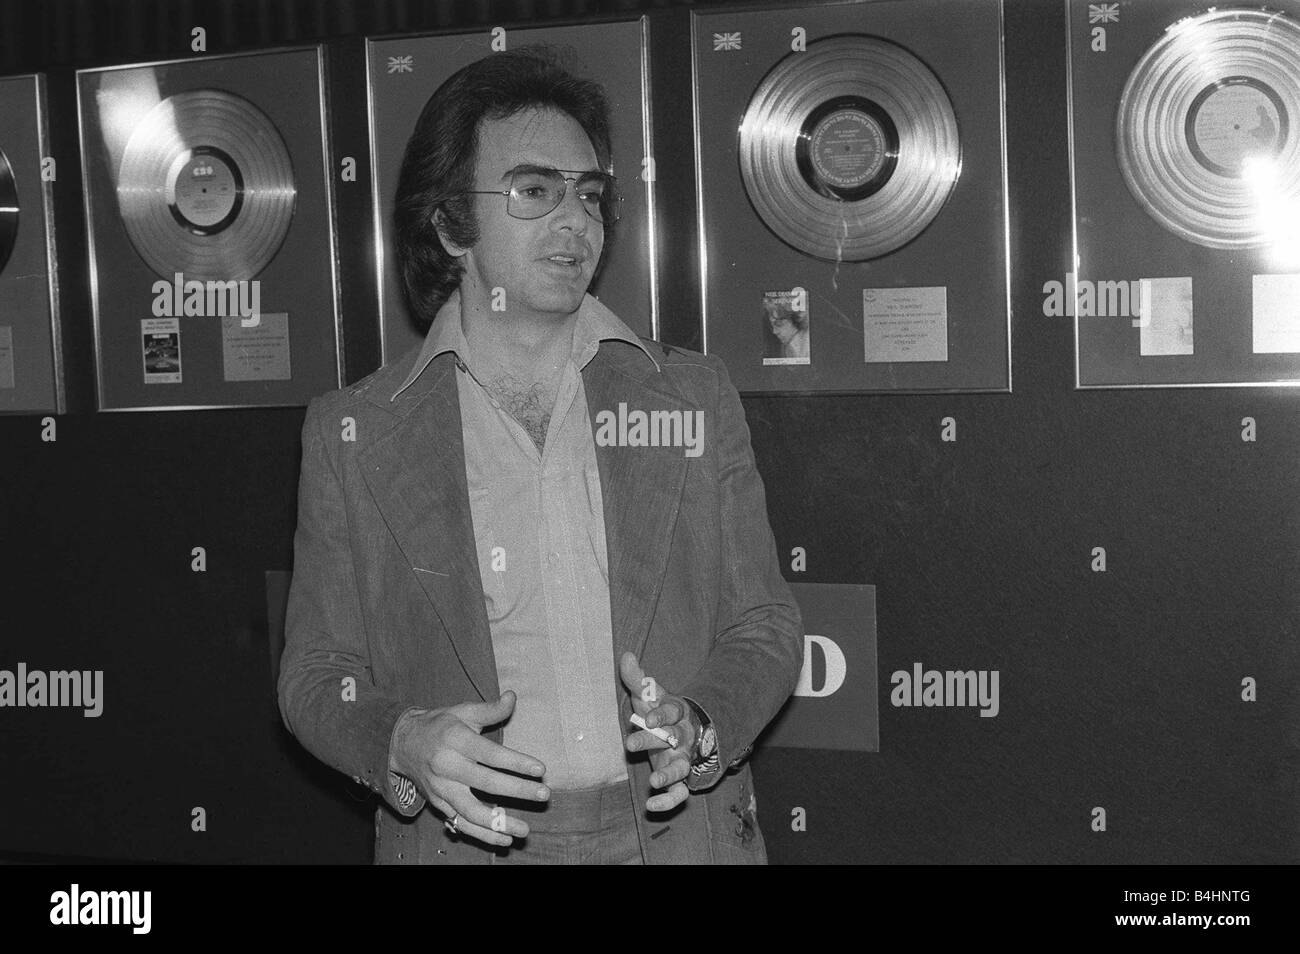 Singer and actor Neil Diamond Disc on wall Cigarette June 1977  LAFjan05 24th January marks the birthday of Neil Diamond born in Stock Photo